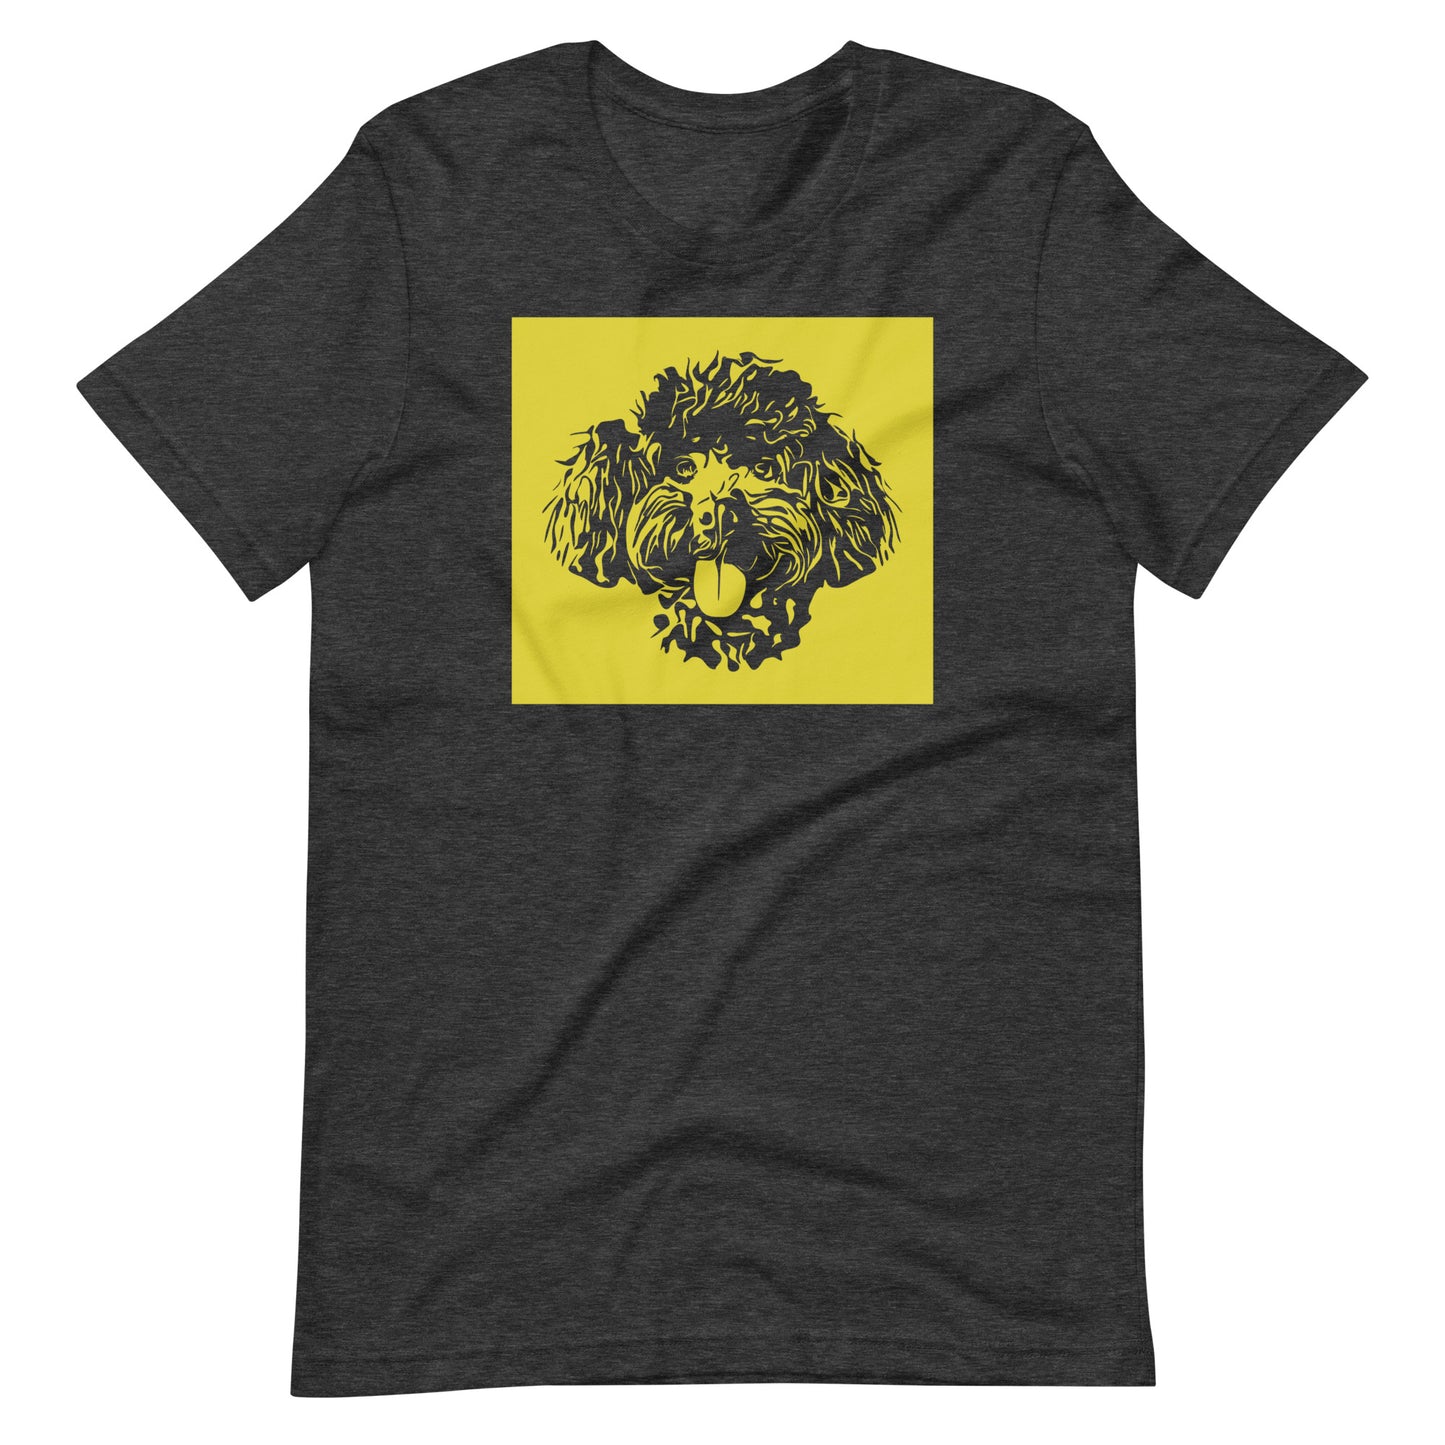 Toy Poodle face silhouette with yellow background square on unisex dark grey heather t-shirt